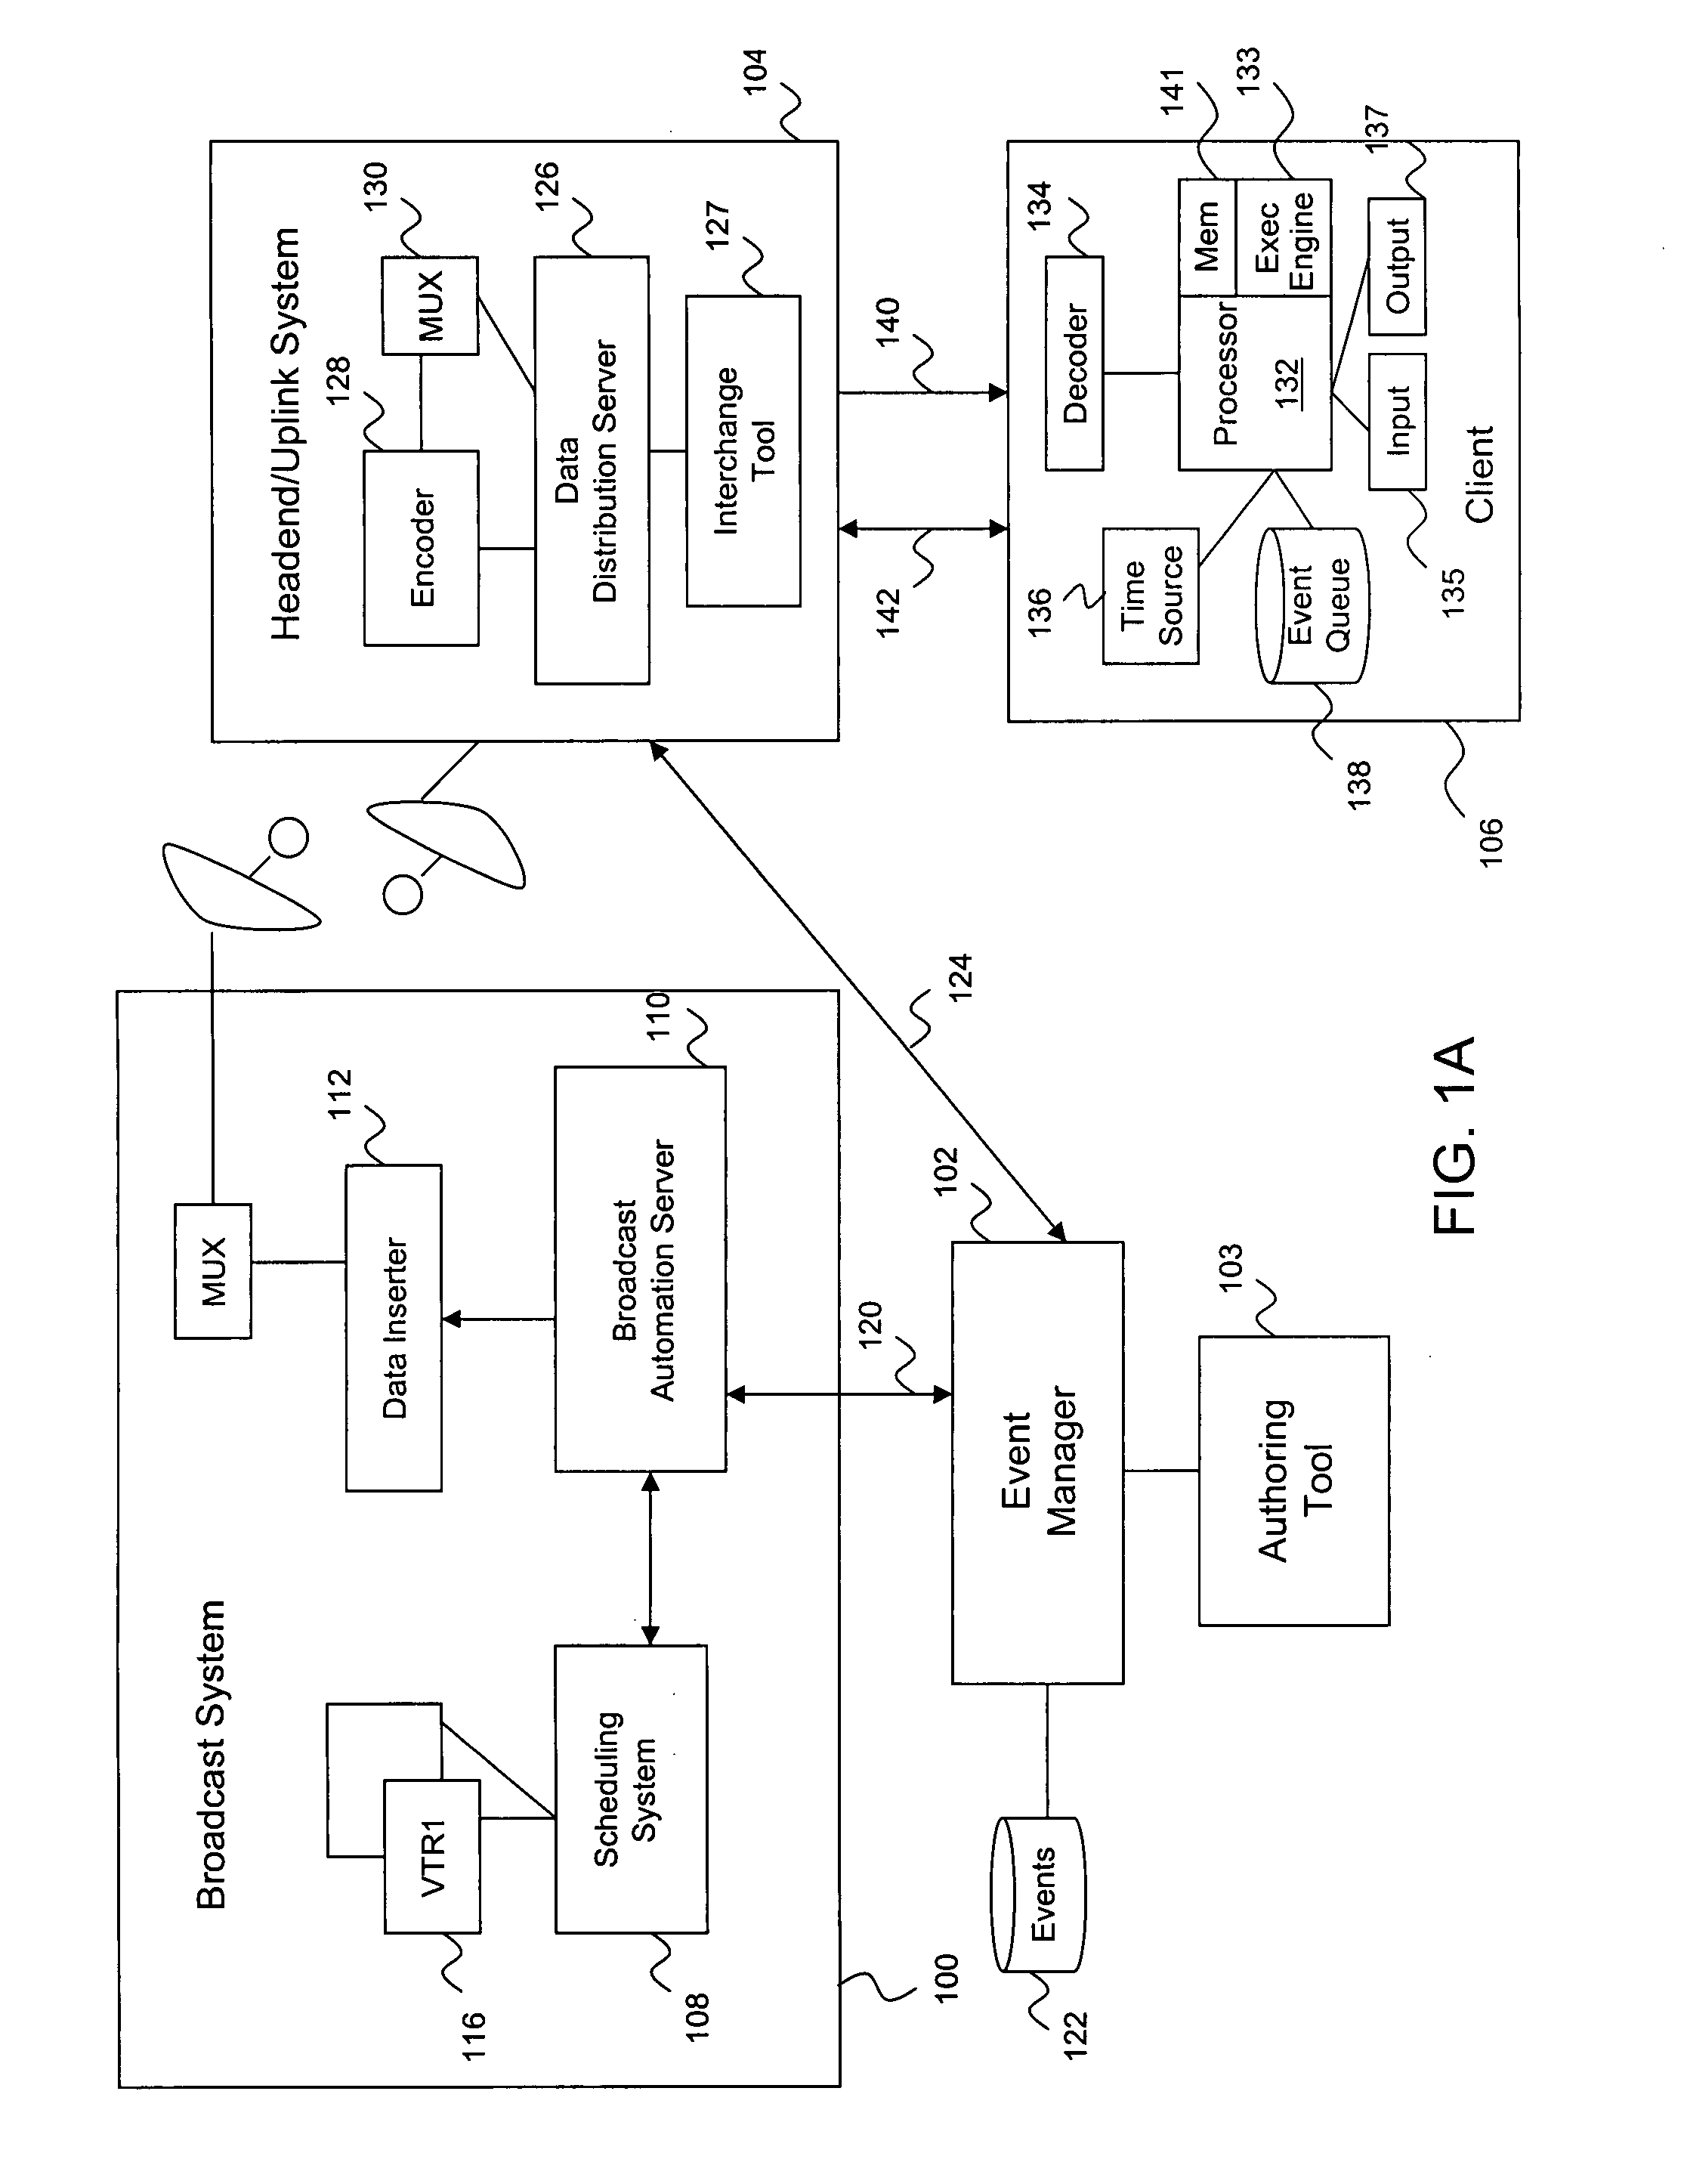 System and method for describing presentation and behavior information in an ITV application